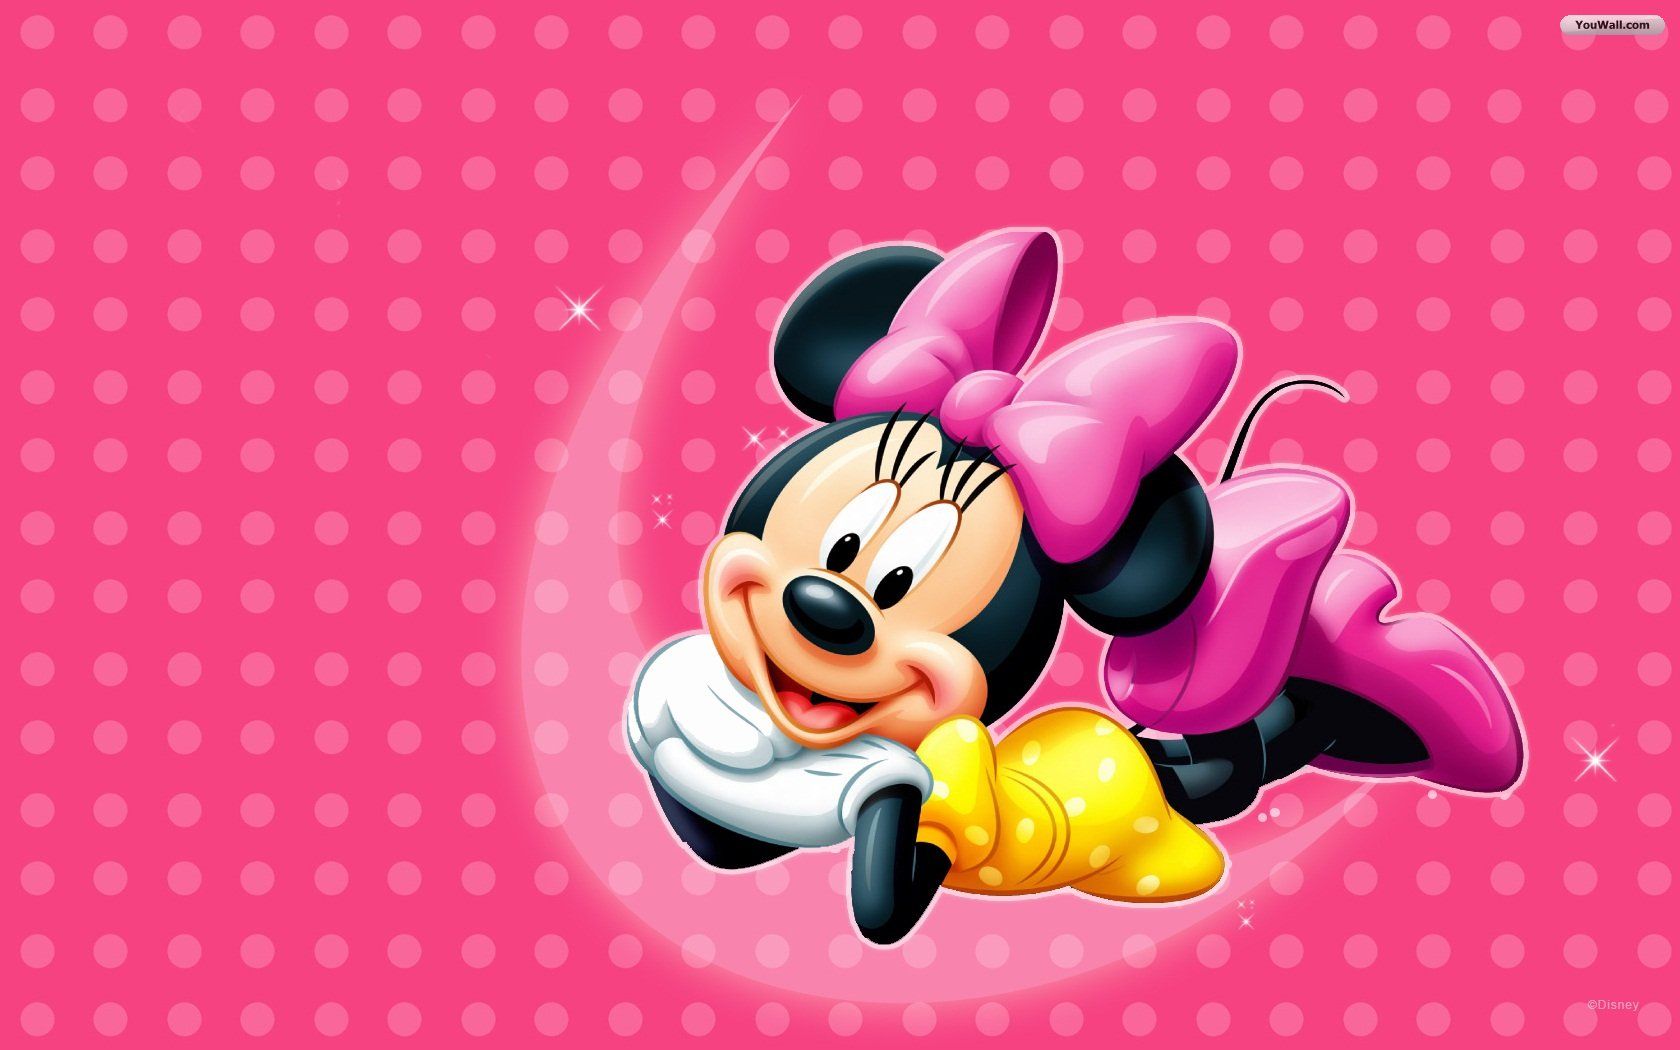 Minnie Mouse wallpaper - Disney wallpapers - #13339 - Minnie Mouse